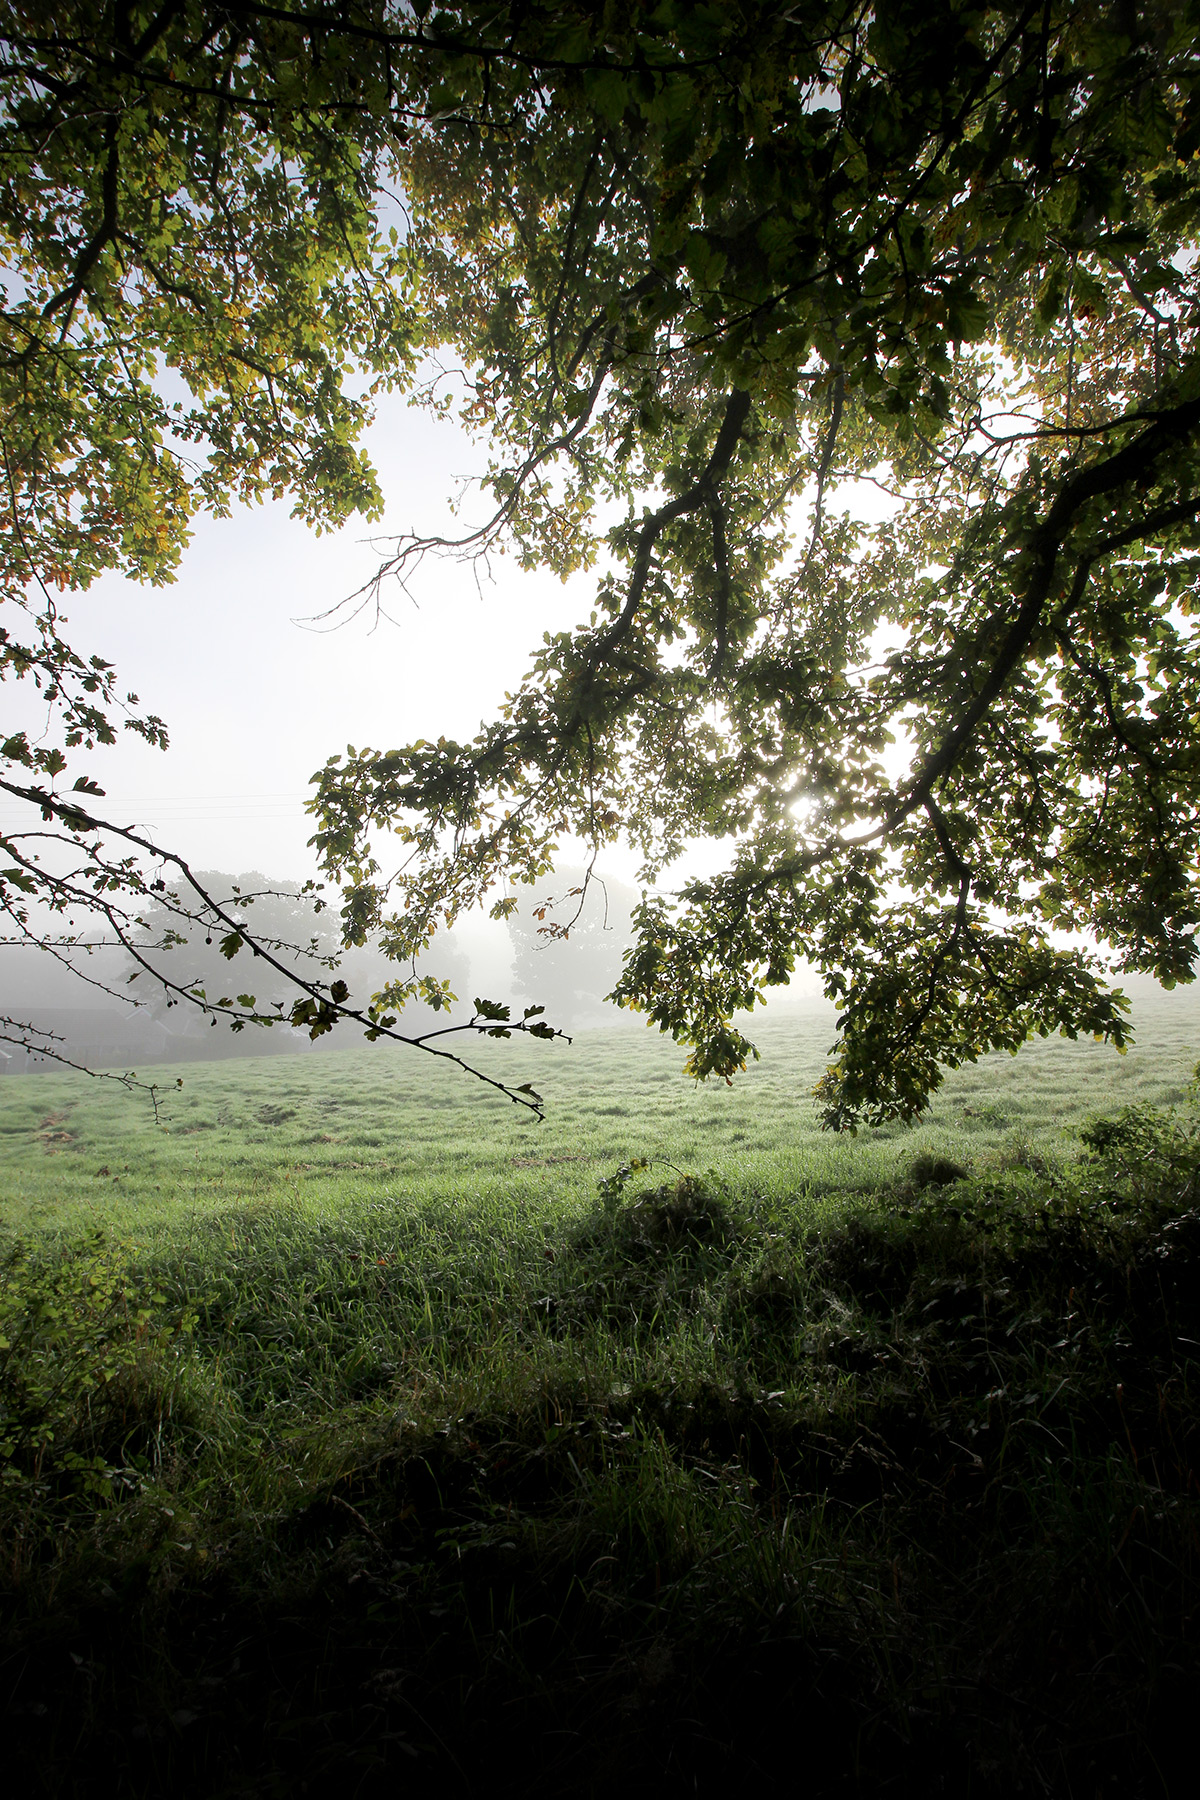 Misty Oak Shade - View of a misty field from the shade of an oak tree - photo by gavstretchy